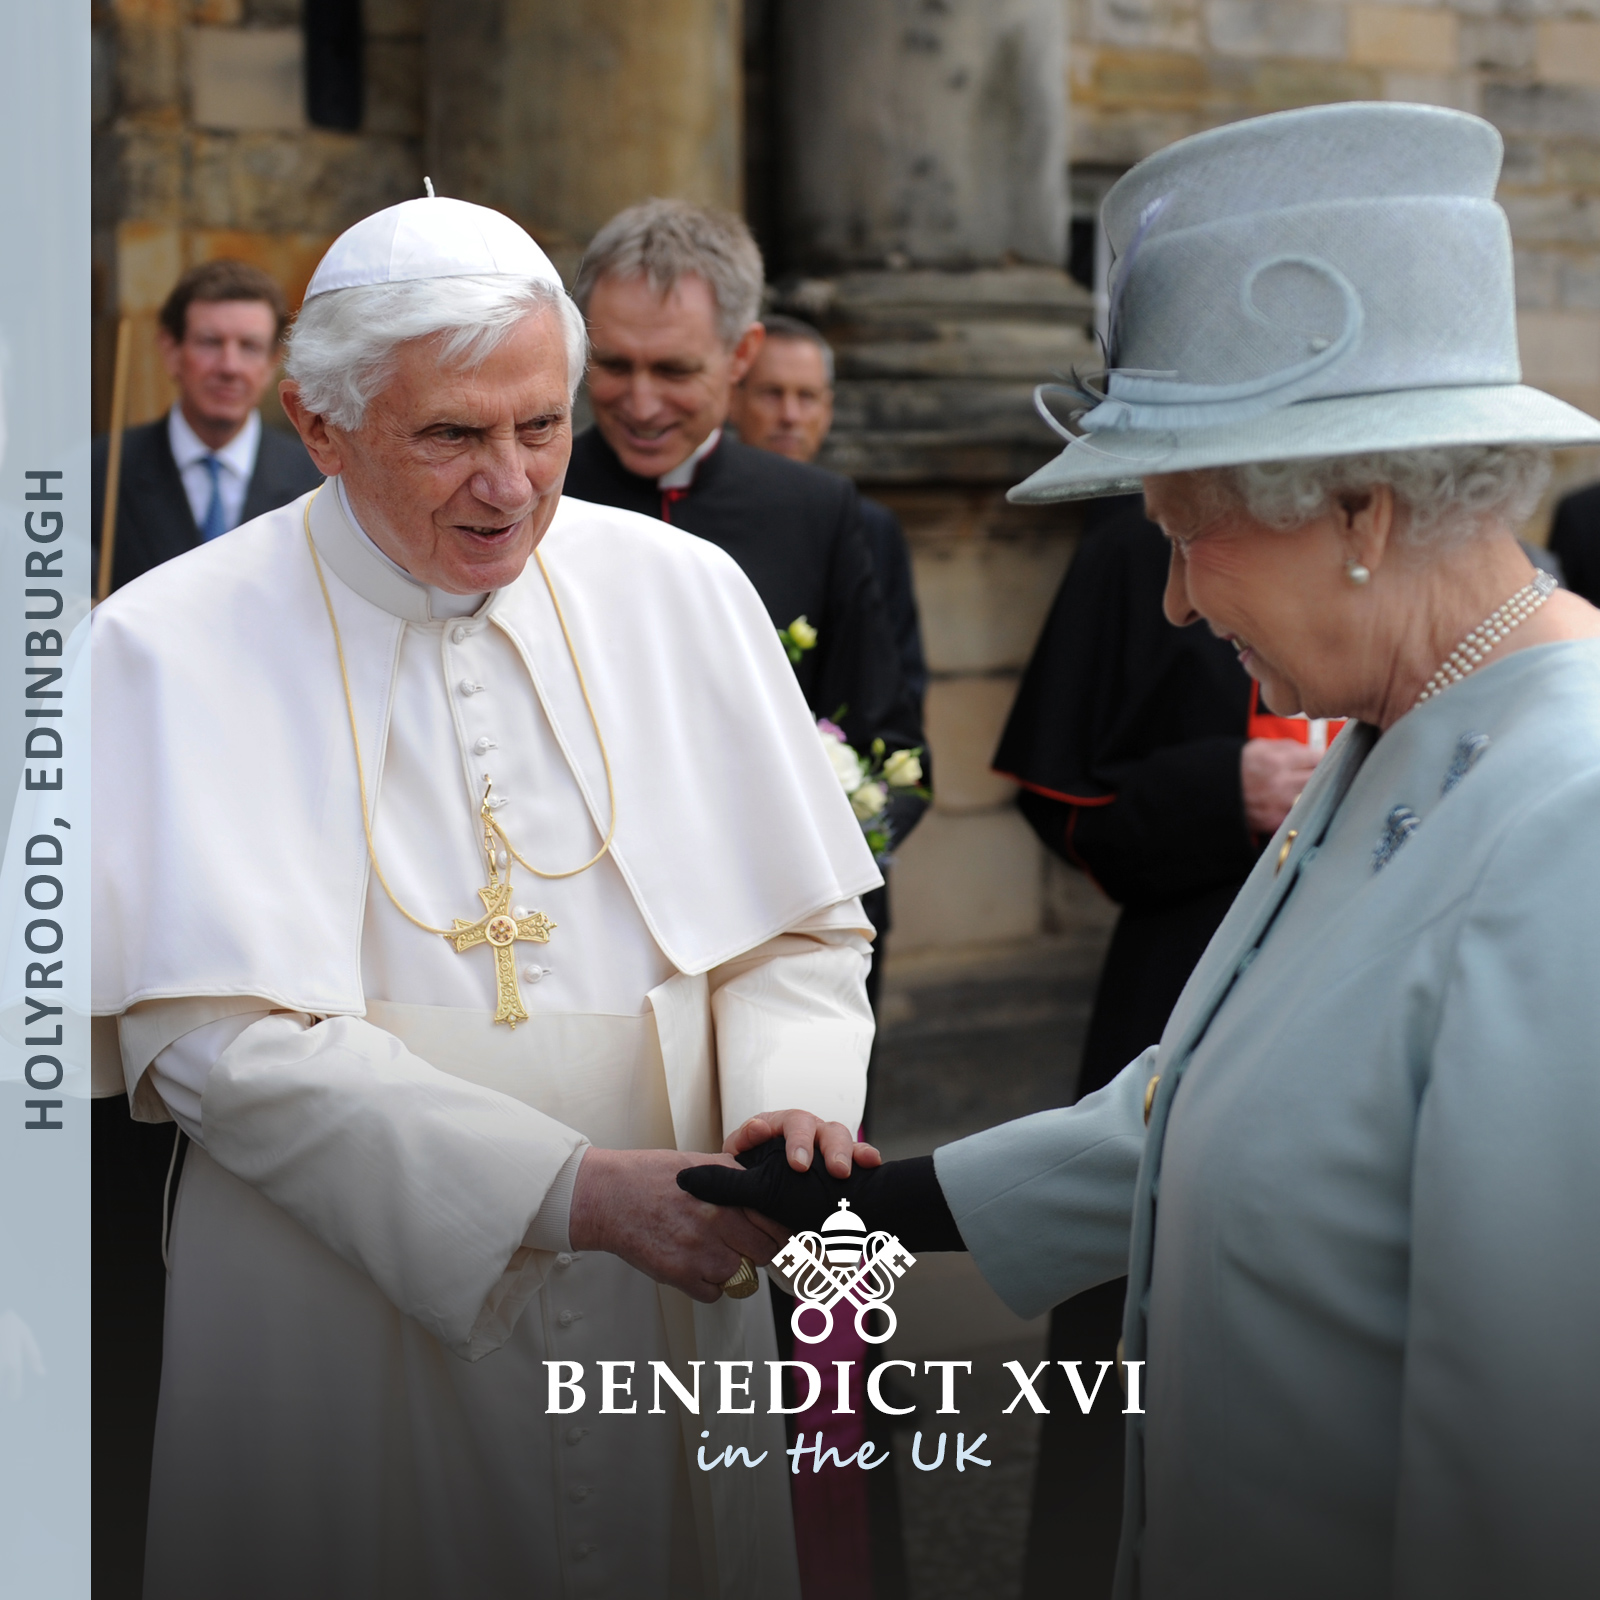  Pope Benedict XVI responds to HM The Queen's welcome 